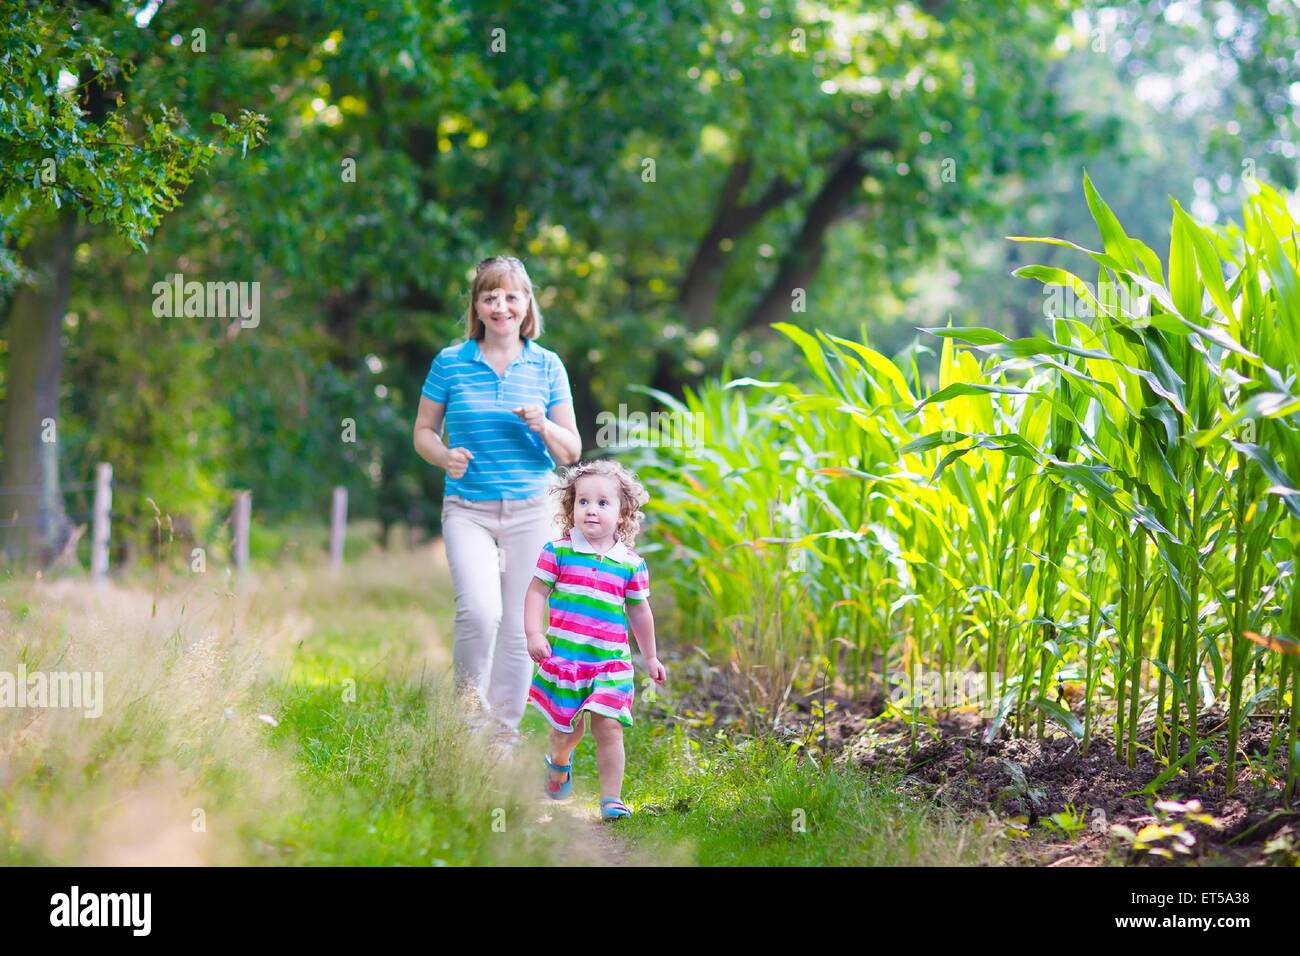 Happy family enjoying a summer day in the forest, active young woman and a cute toddler girl running next to a corn field Stock Photo